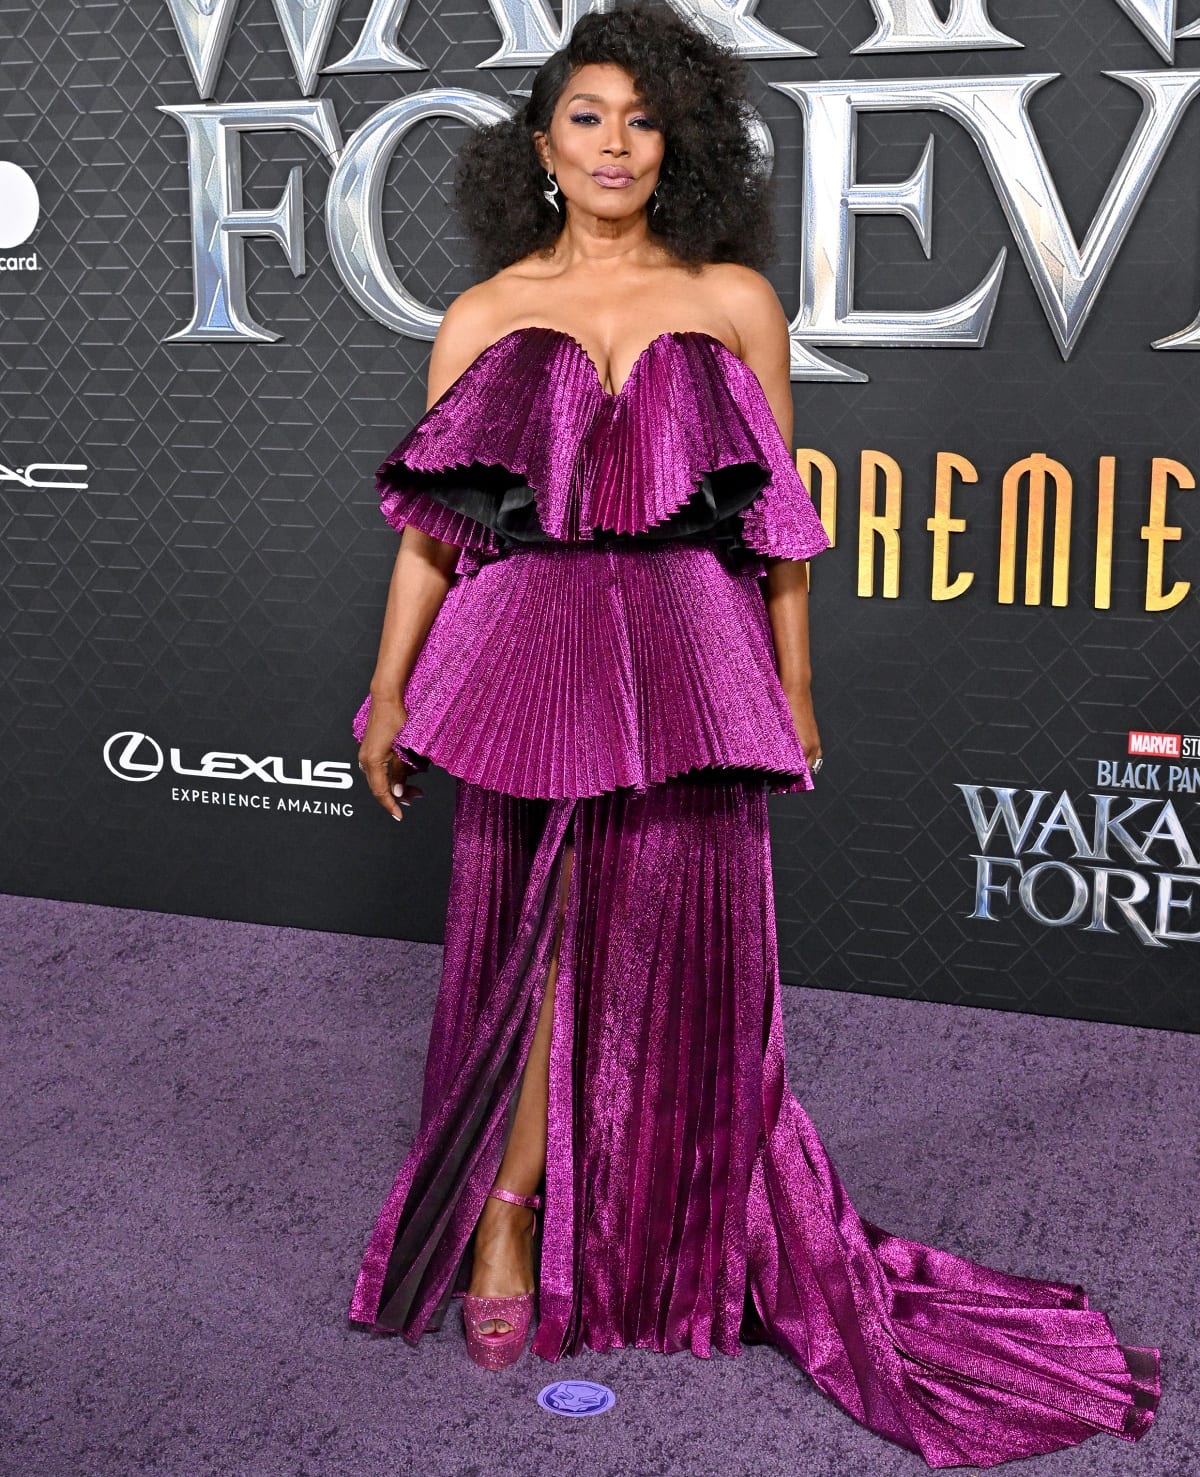 Angela Bassett wearing a custom Moschino strapless gown and Le Silla heels